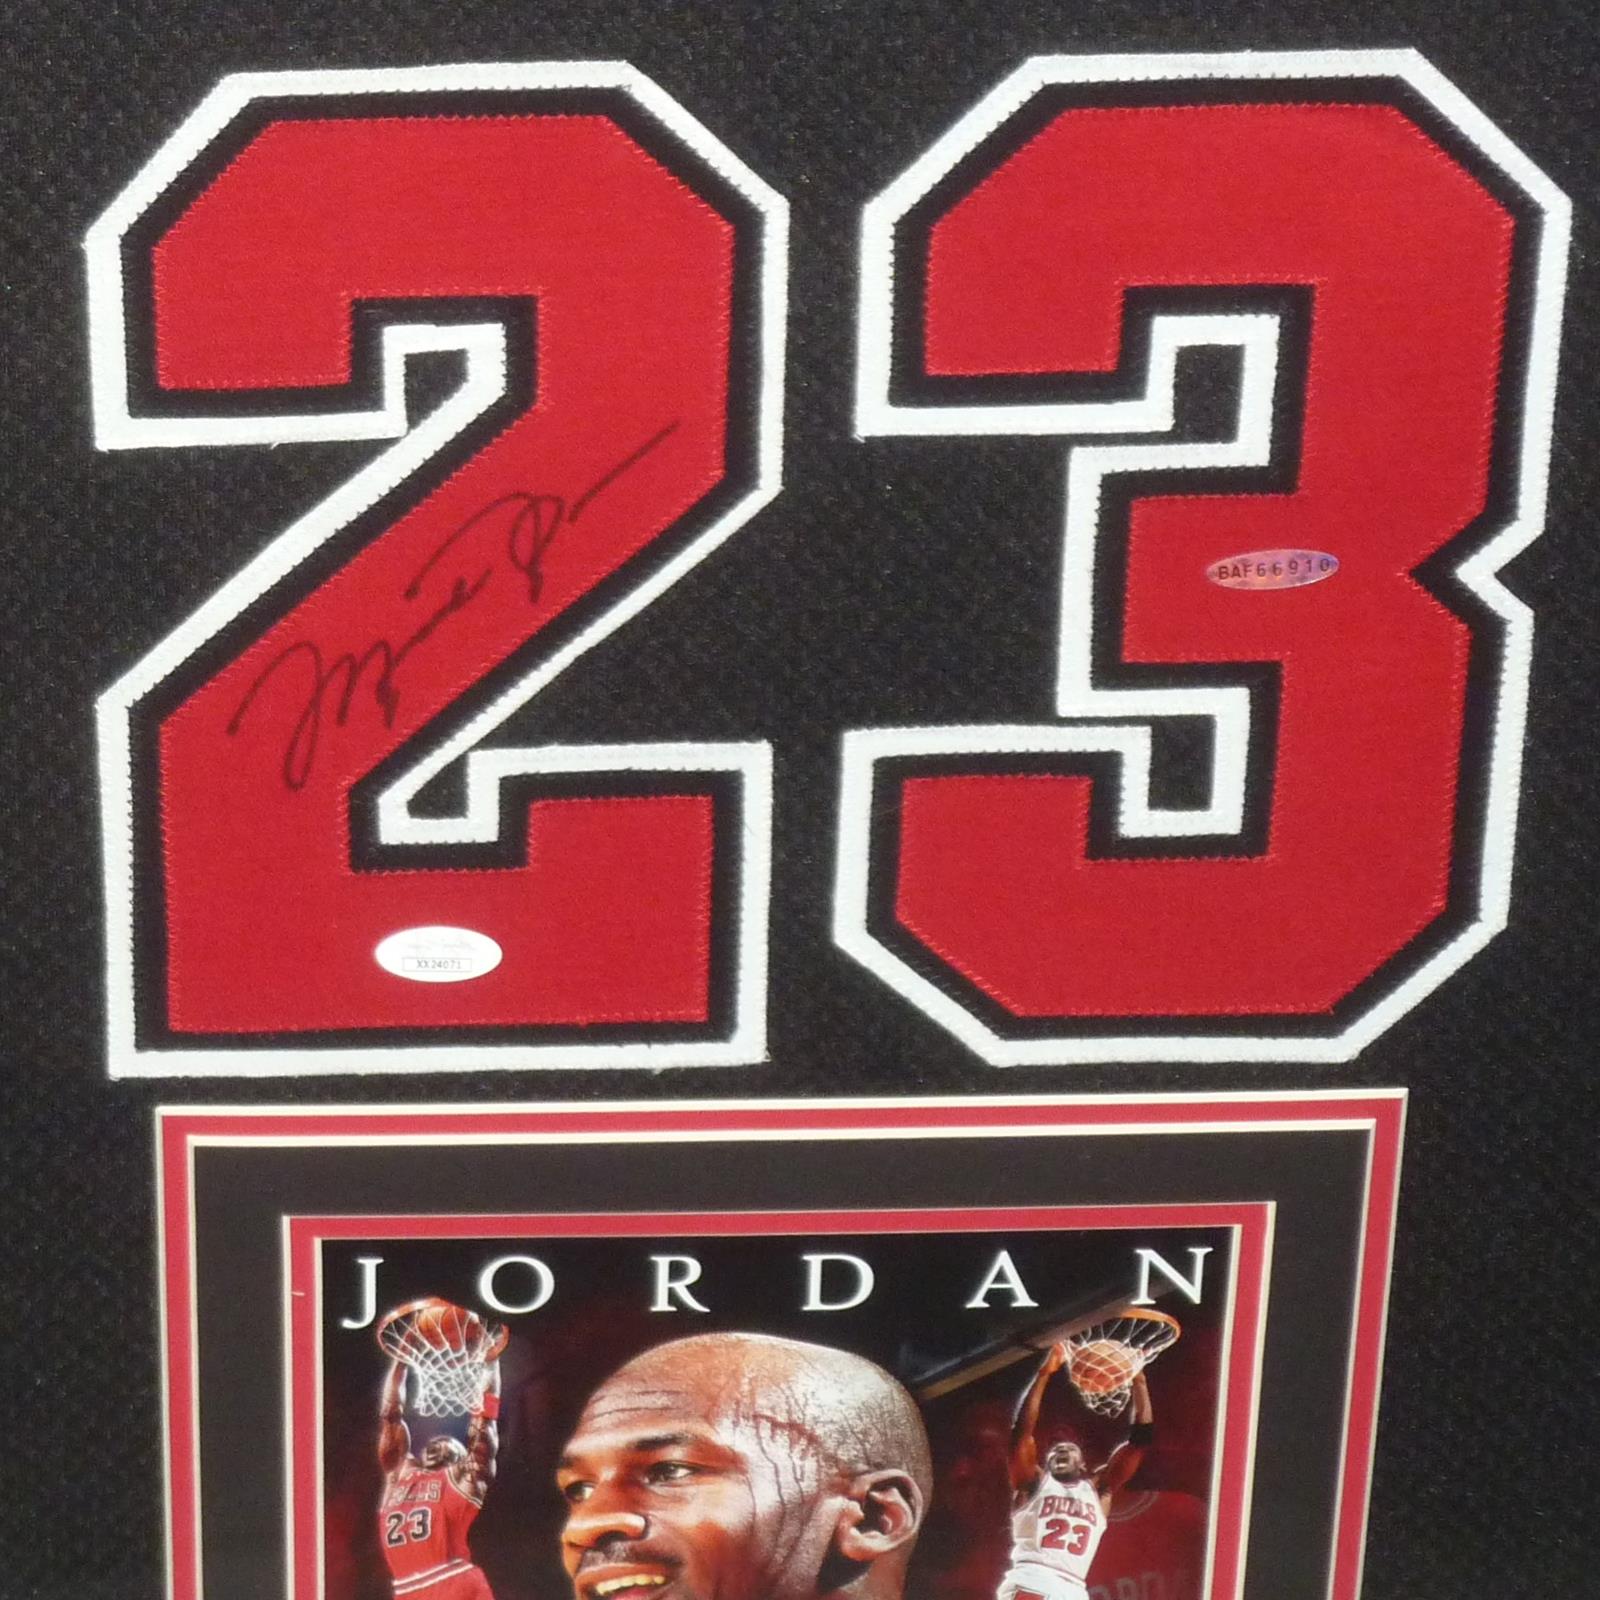 Autographed Chicago Bulls Michael Jordan White Nike Jersey with